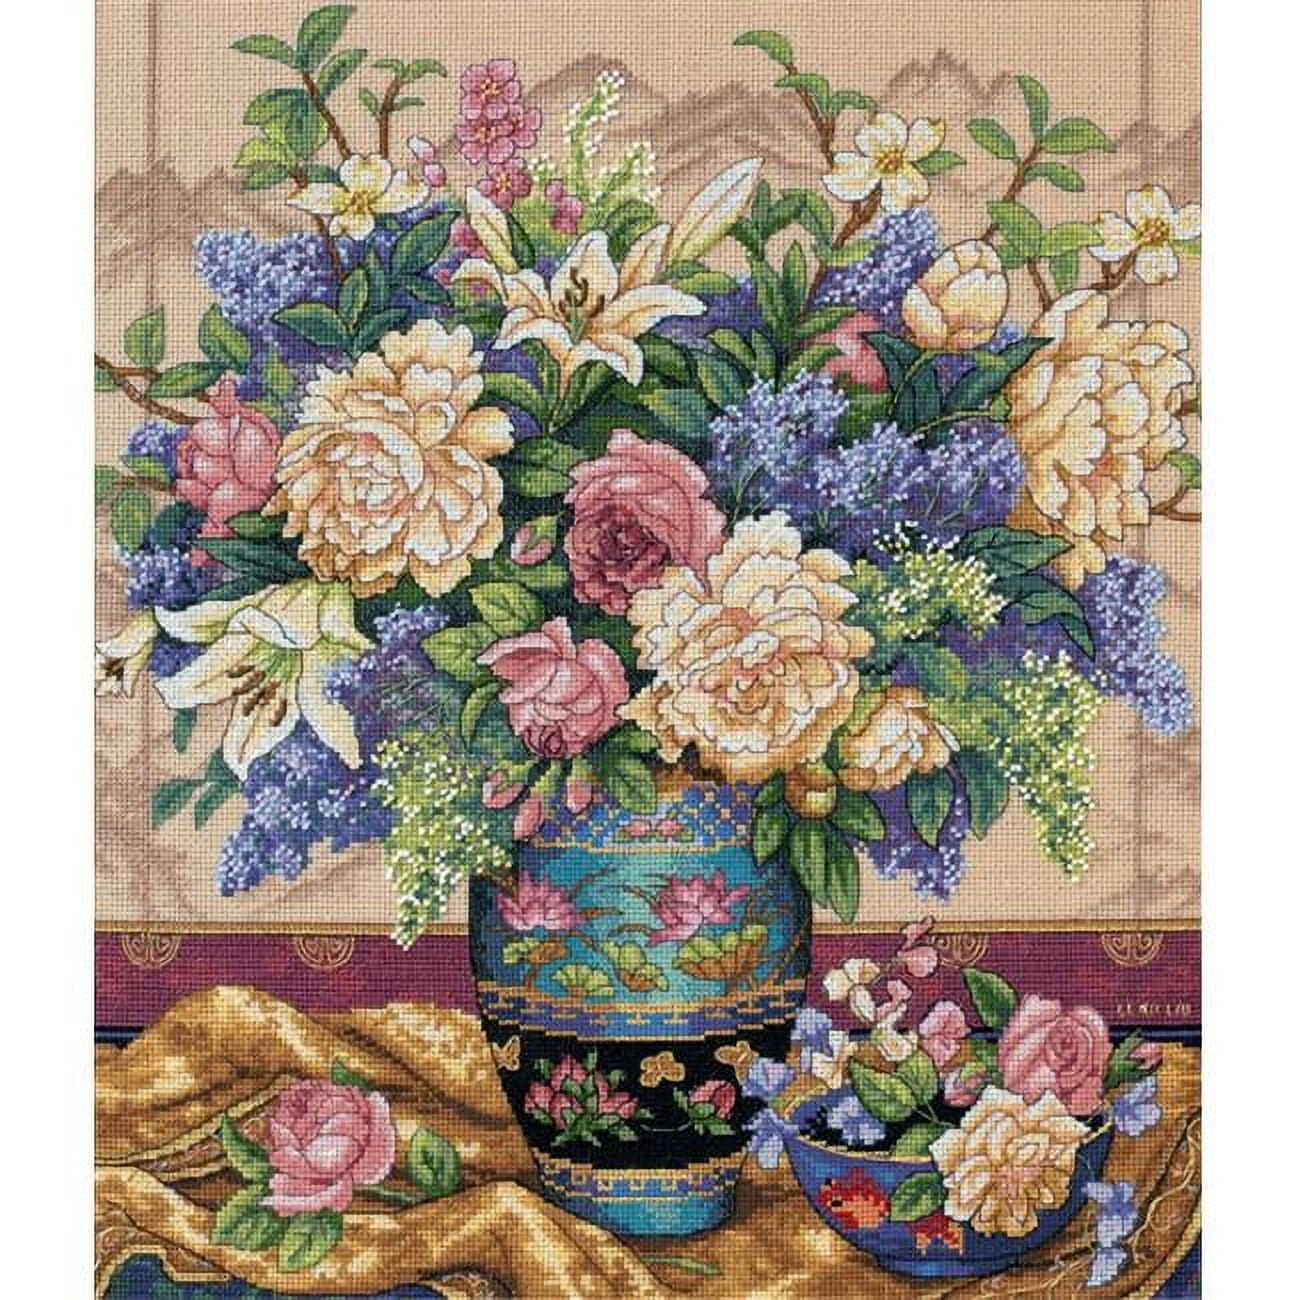 Oriental Splendor 12"x14" Beige Aida Counted Cross Stitch Kit with Gold Highlights